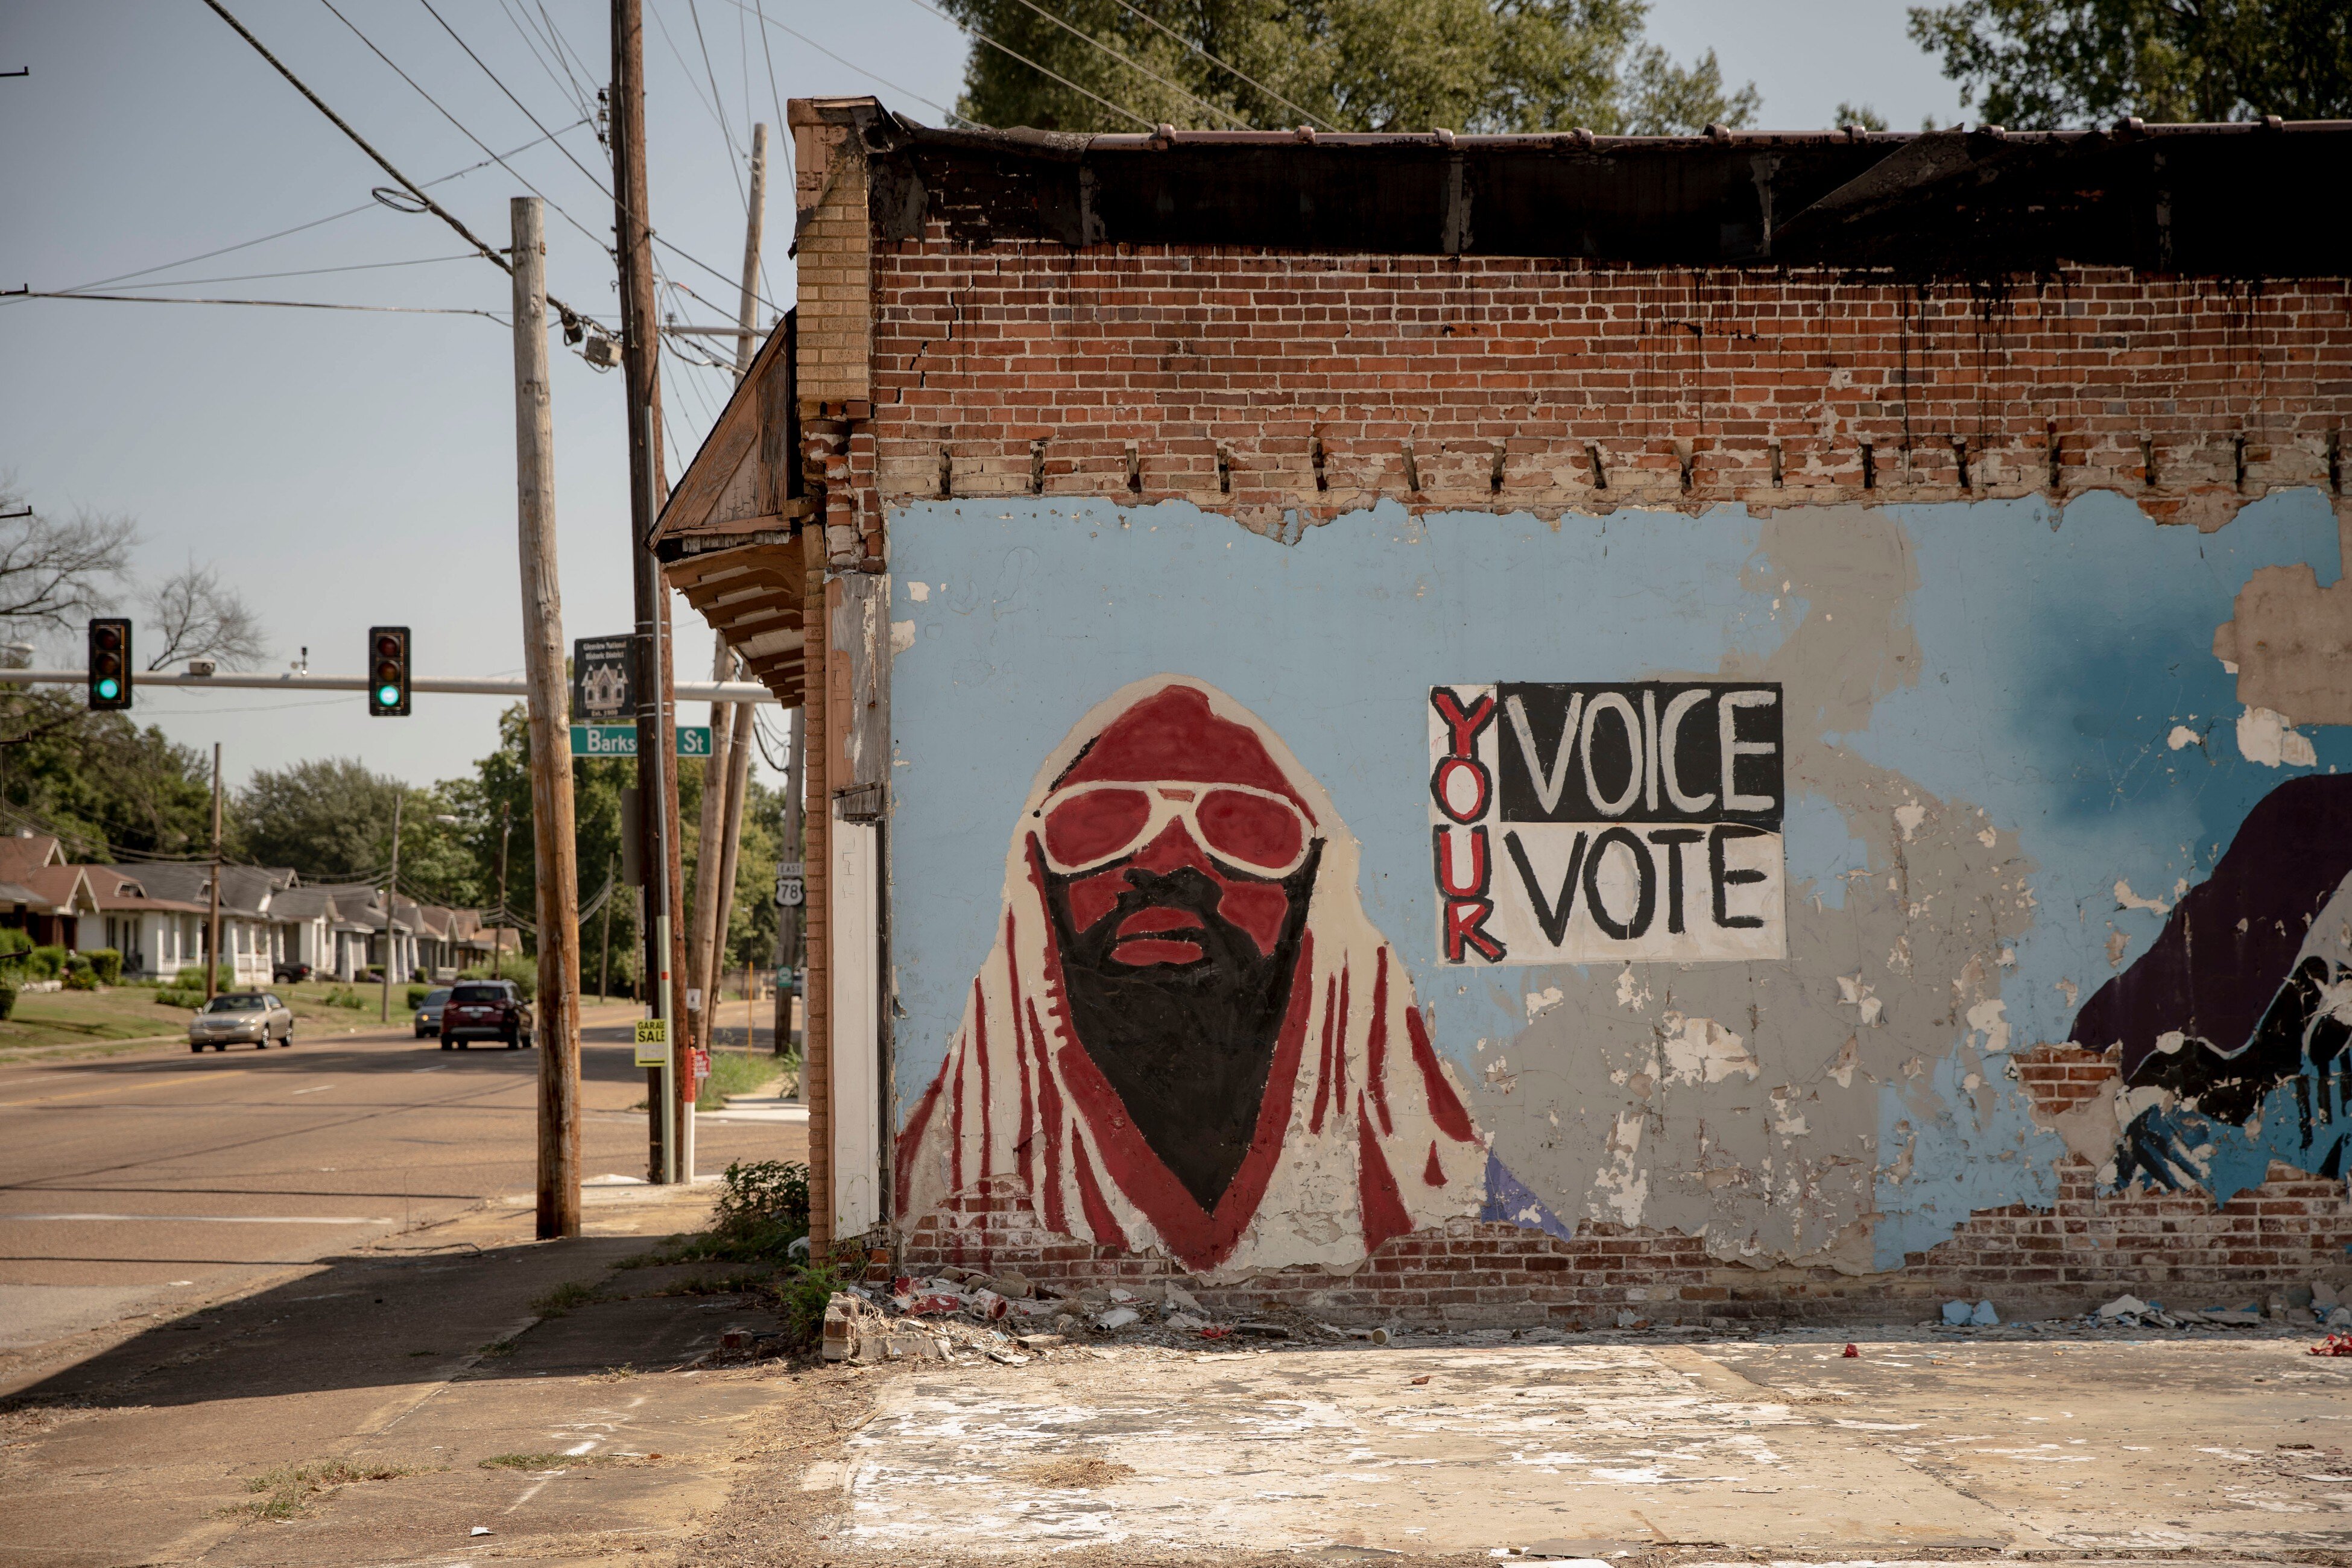 A mural in the Glenview Historic District encourages Memphians to vote. (Andrea Morales)